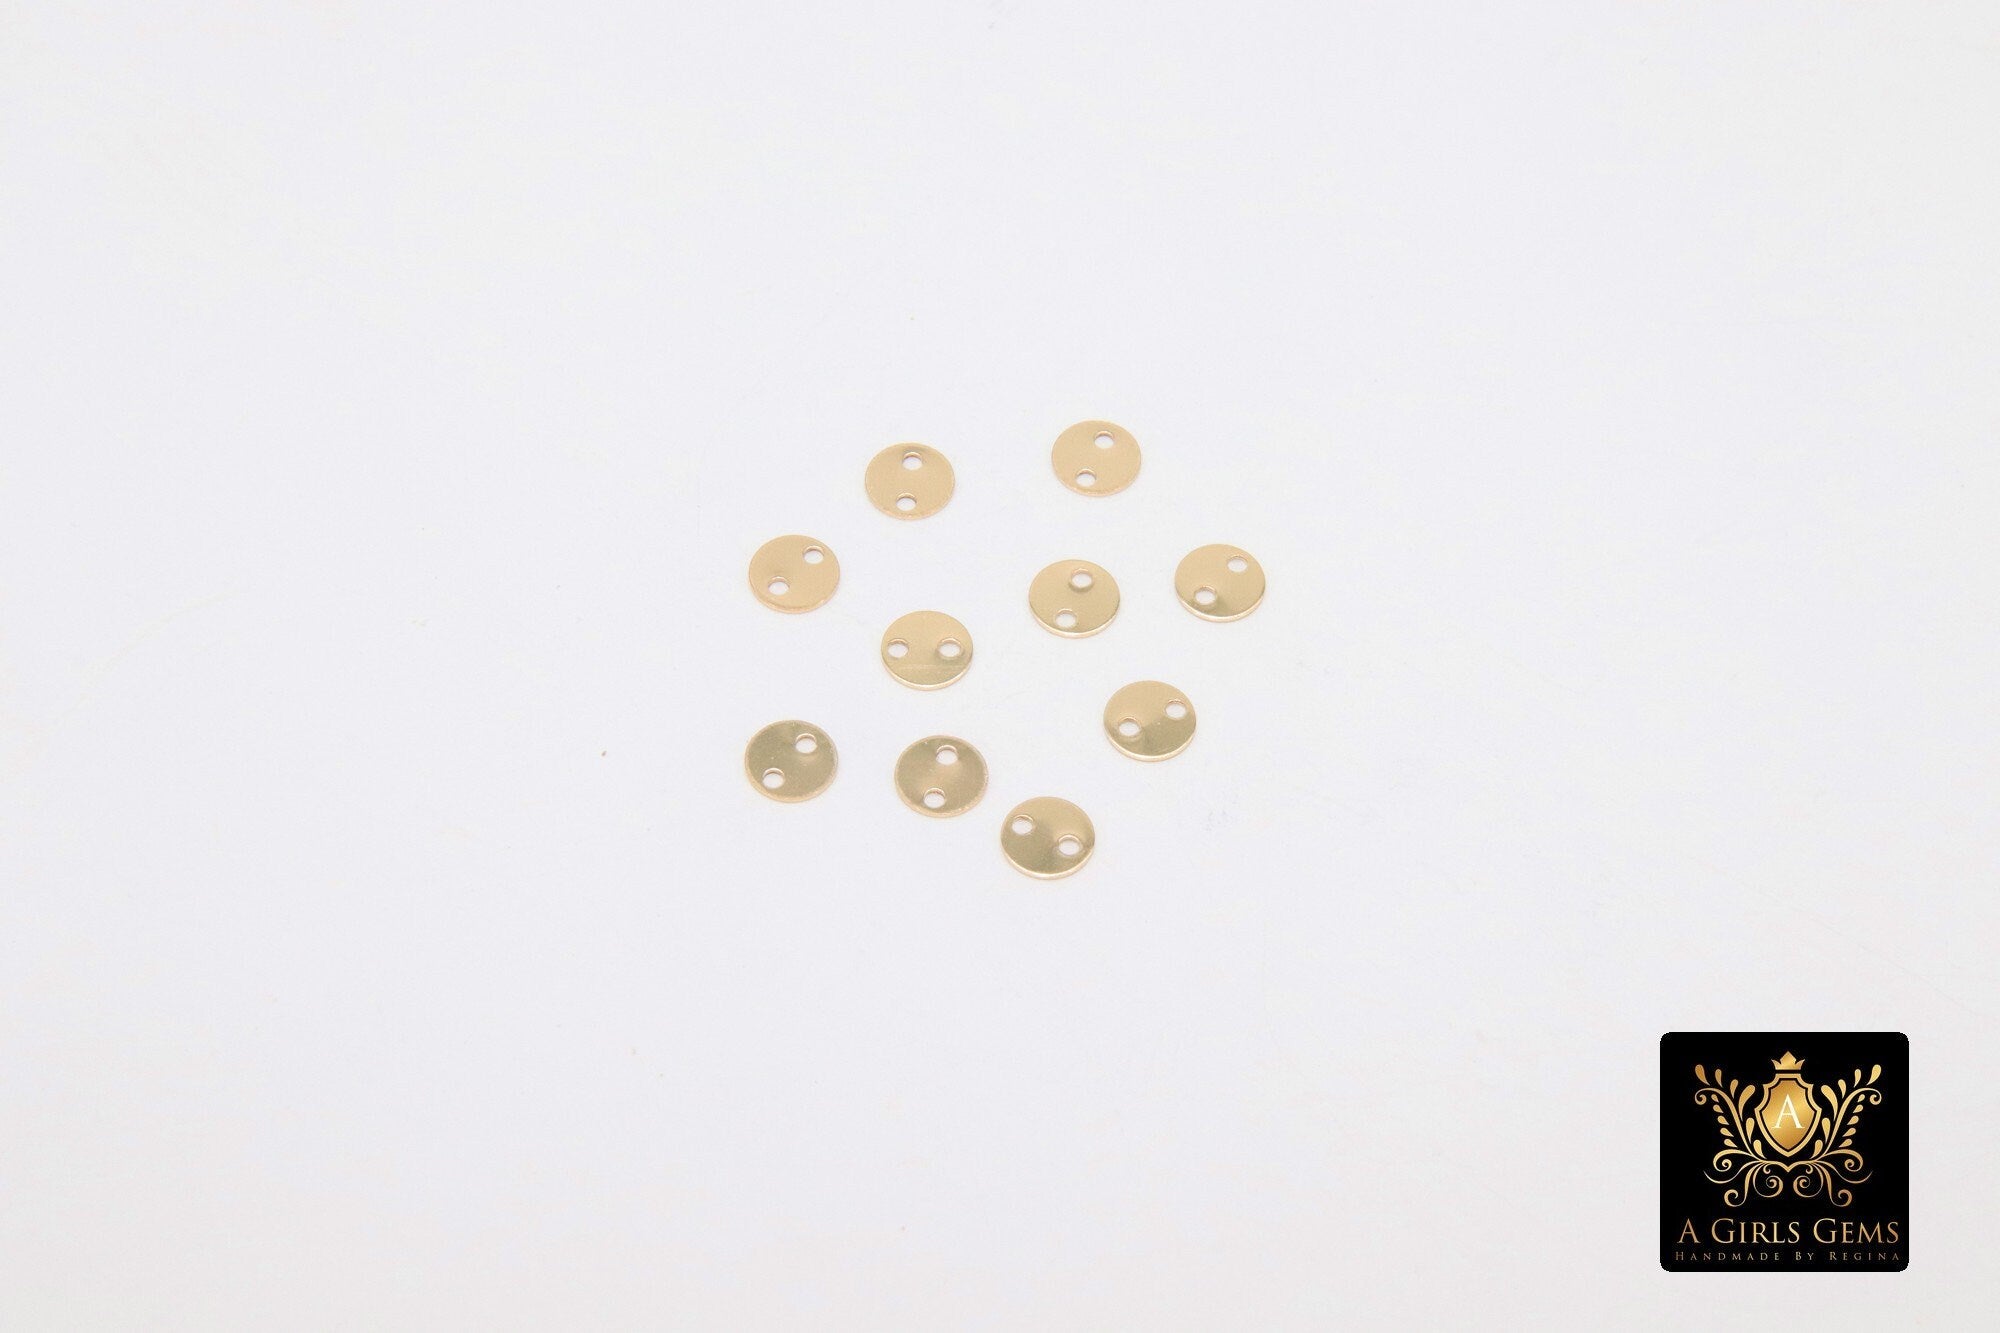 14 K Gold Filled 4 mm Round Disc Connectors, 10 Pc Tiny Flat Gold Blanks #2245, Minimalist 14 20 Jewelry